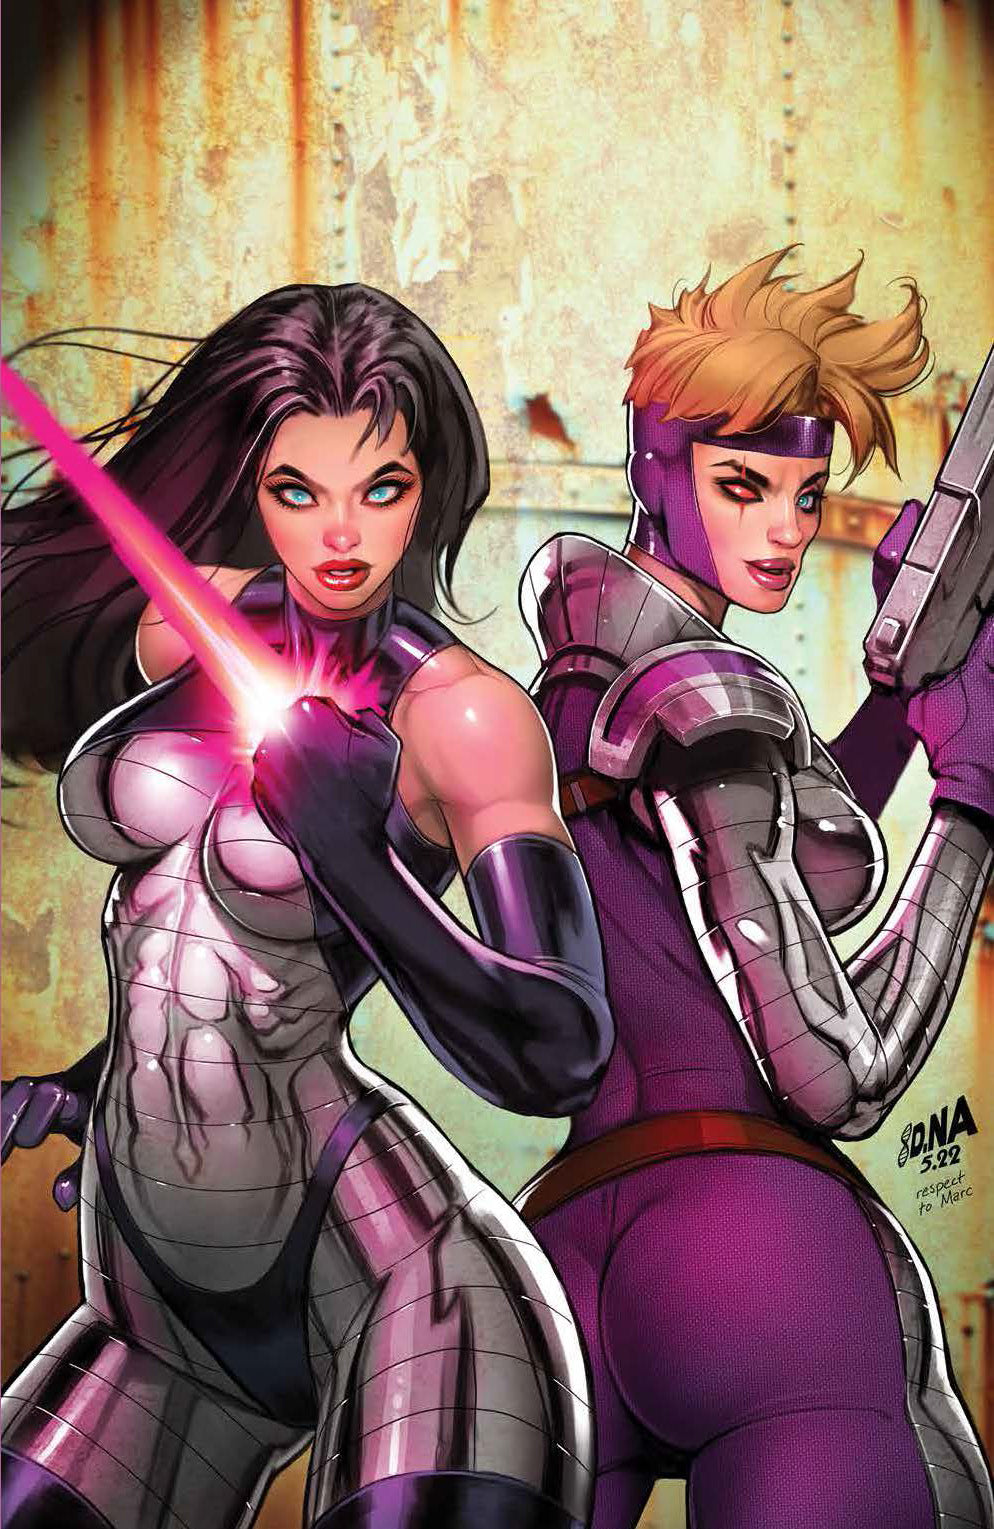 CYBERFORCE #1 30TH ANNV DAVID NAKAYAMA & MICO SUAYAN EXCLUSIVE VARIANT OPTIONS